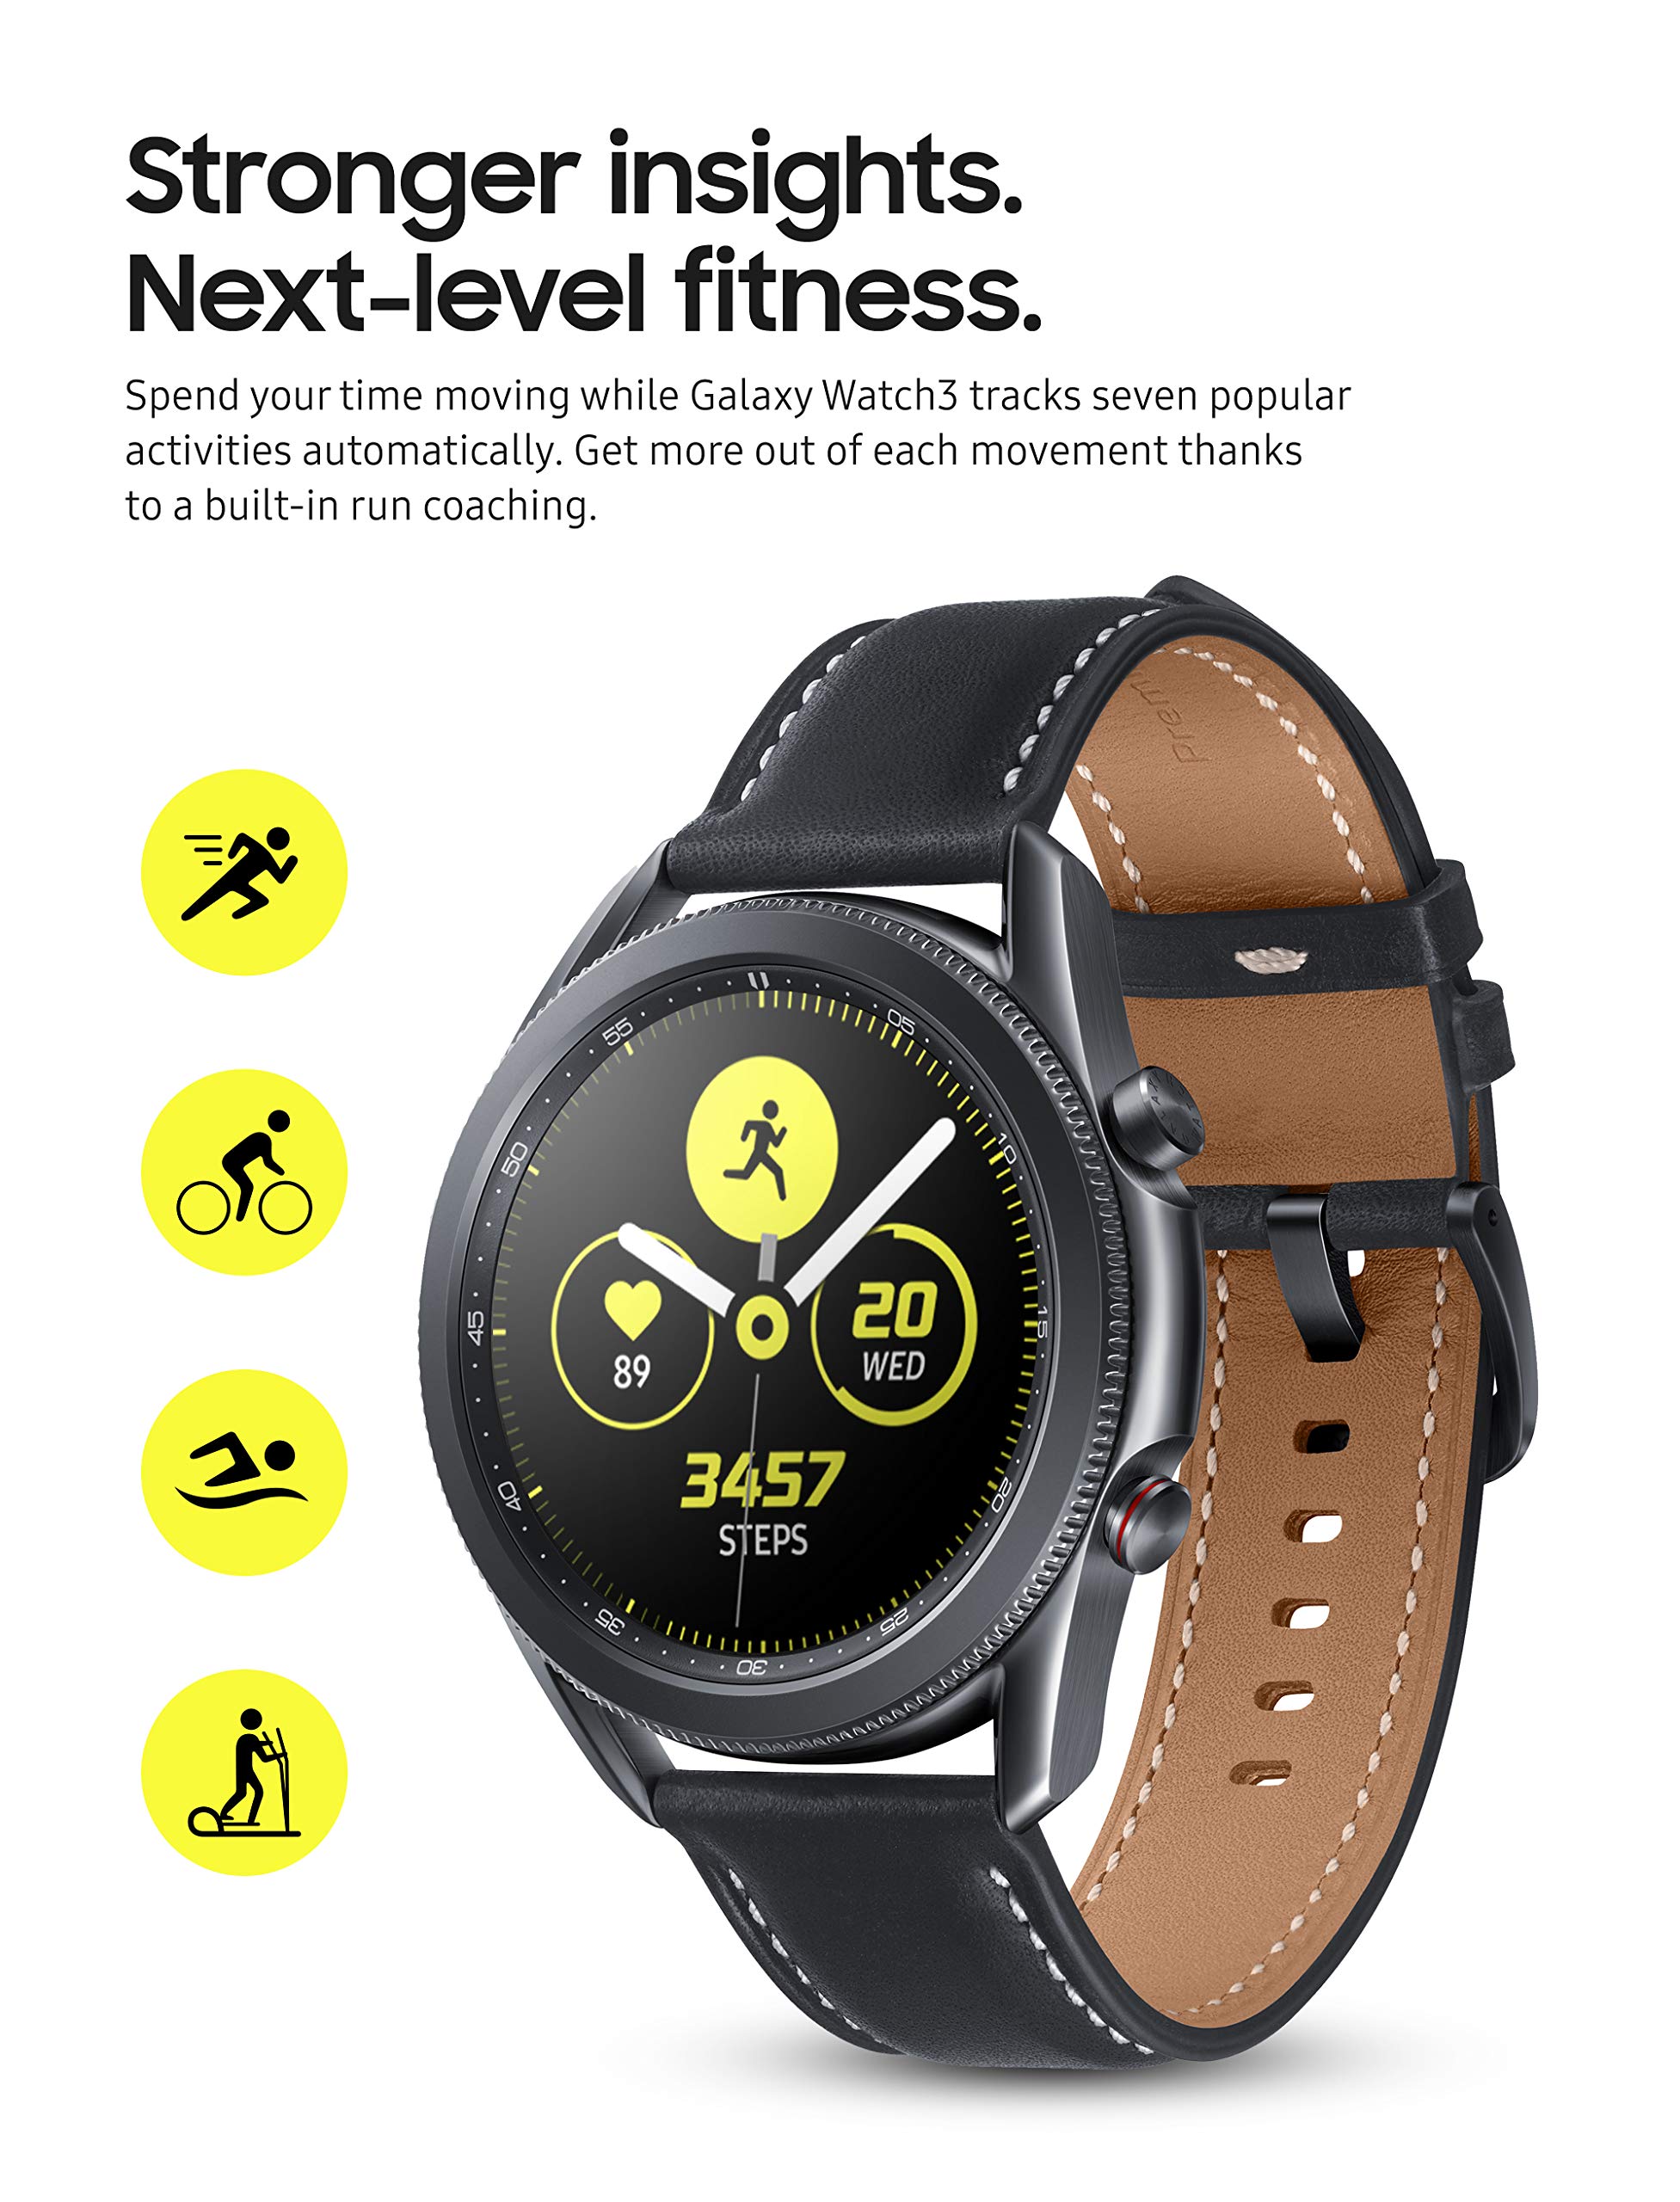 SAMSUNG Galaxy Watch 3 (45mm, GPS, Bluetooth, Unlocked LTE) Smart Watch with Advanced Health Monitoring, Fitness Tracking, and Long Lasting Battery - Mystic Black (US Version)